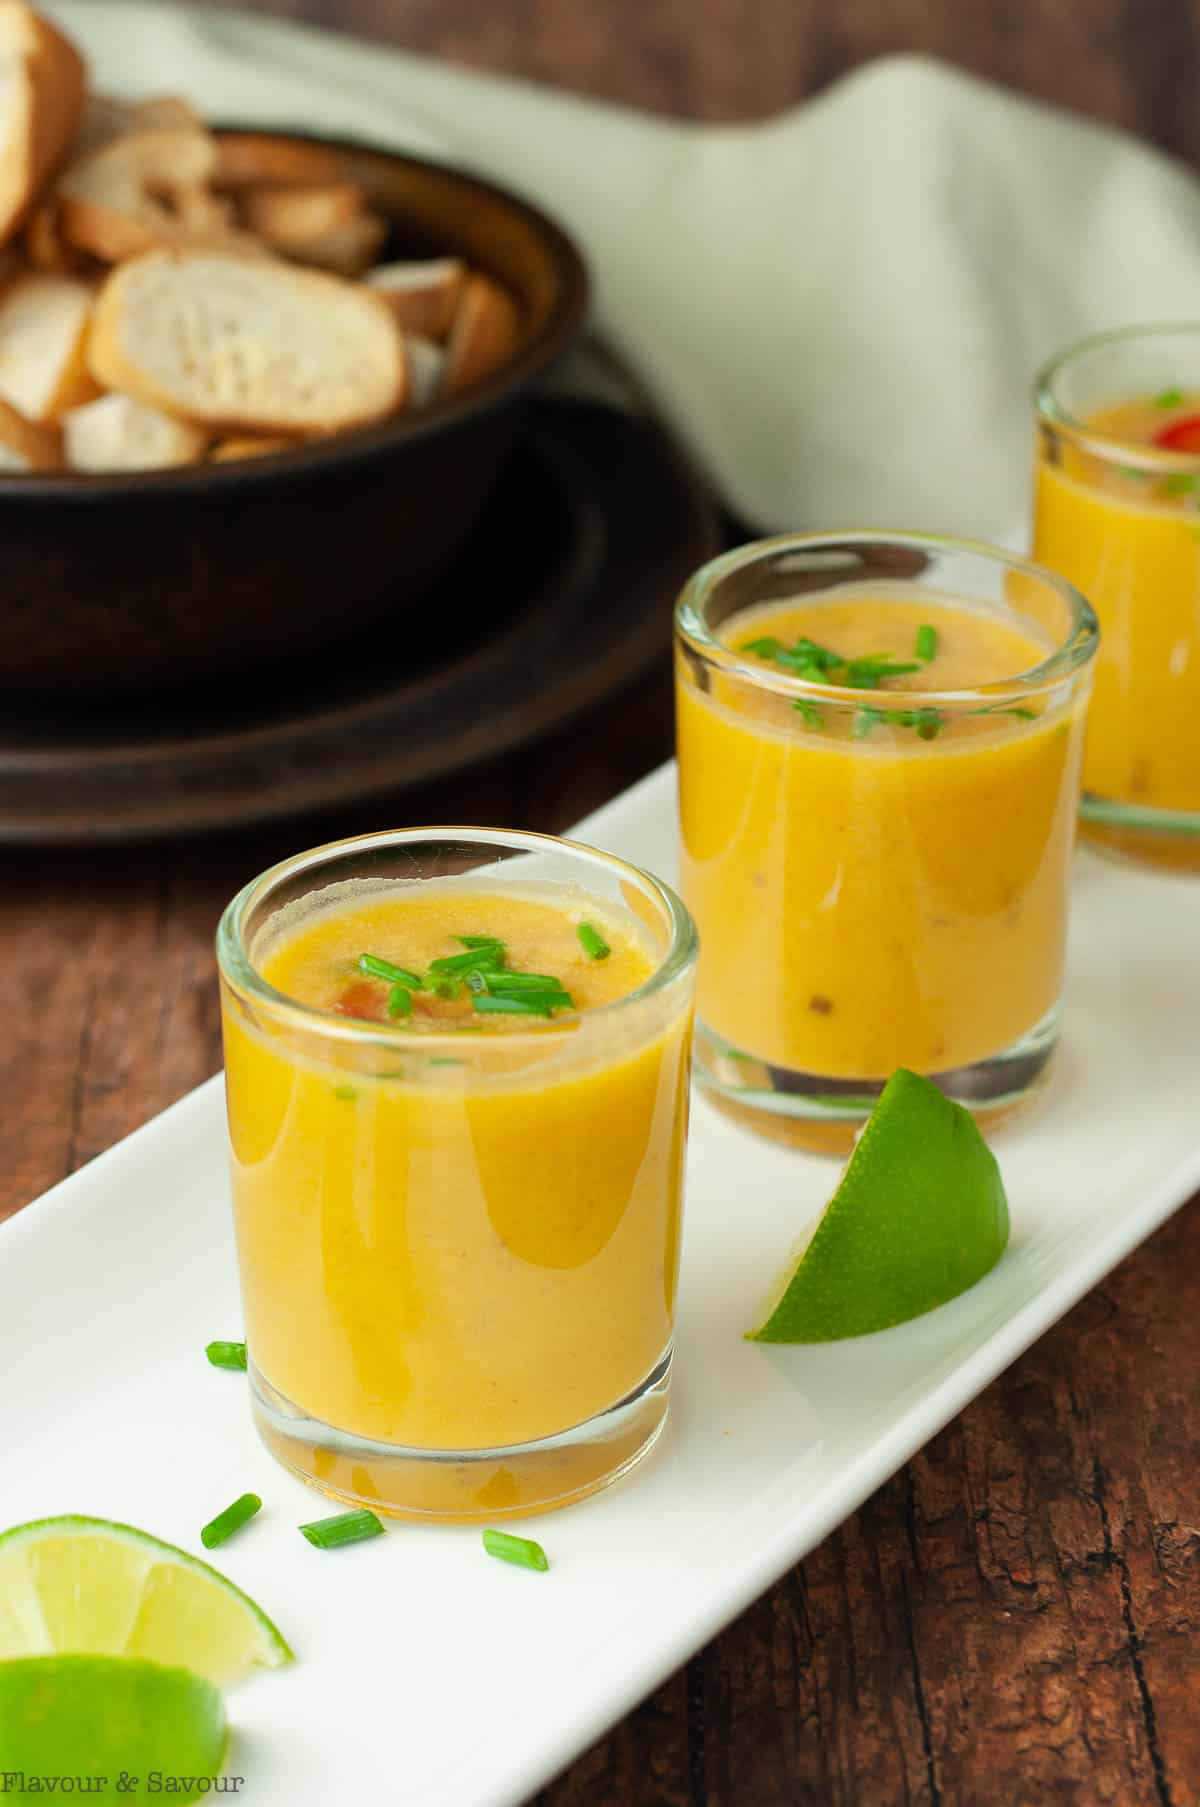 Thai pumpkin soup shots in small glasses on a white tray.